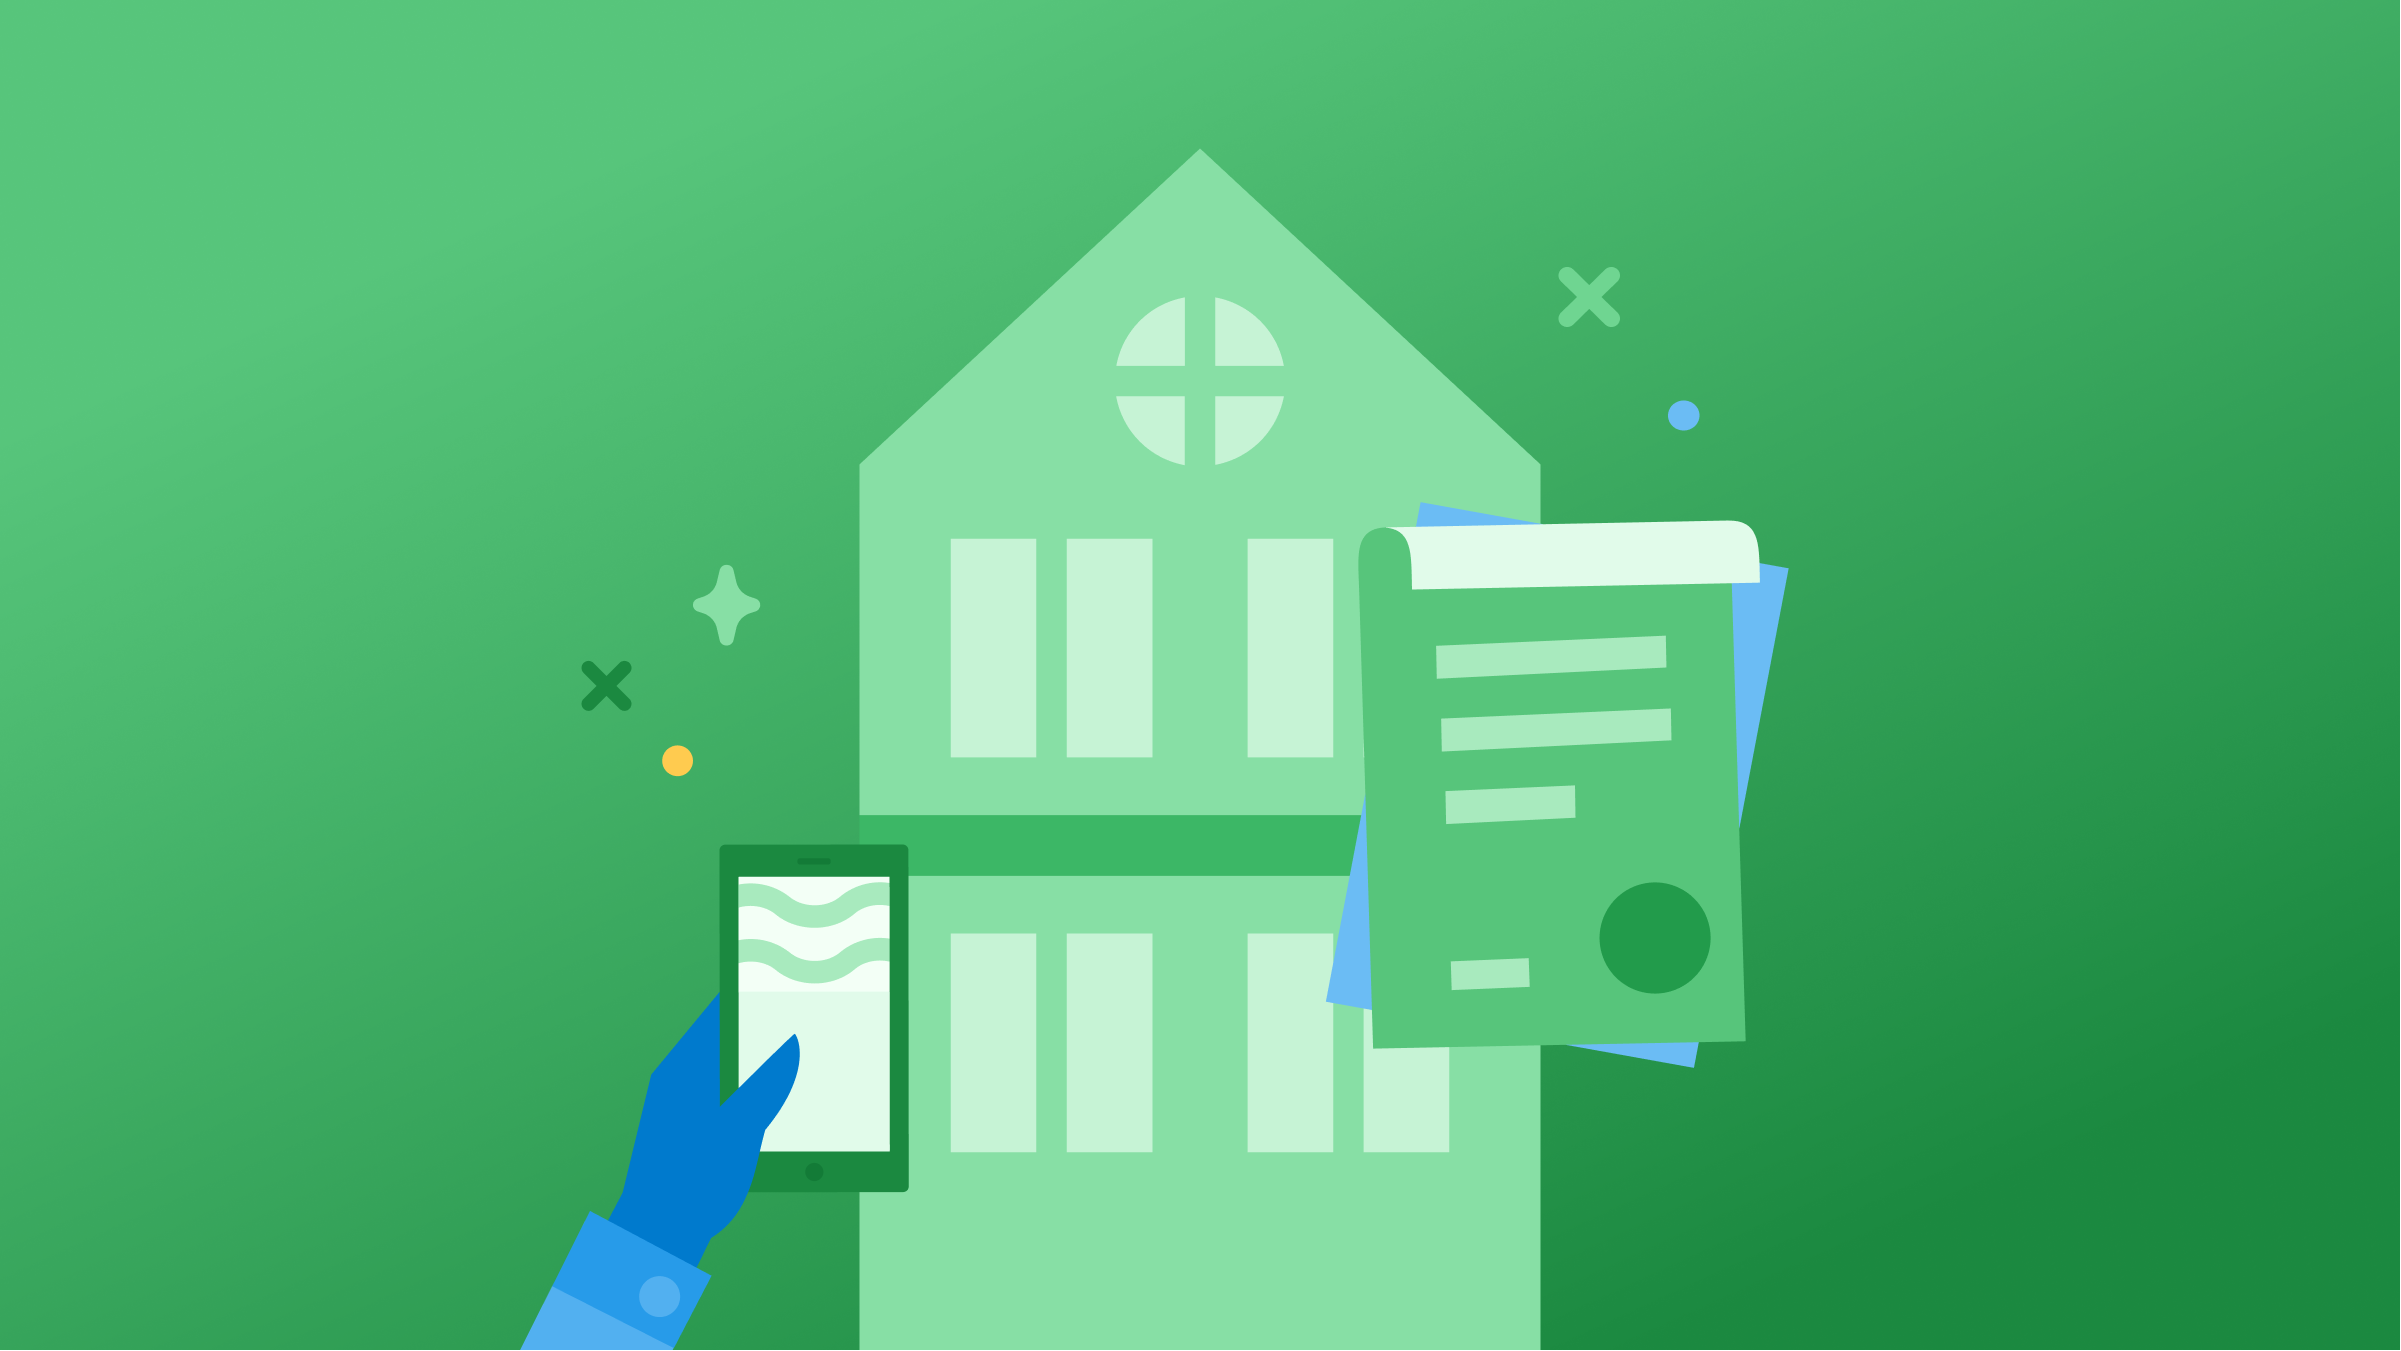 Illustration with a house and a hand holding a phone and a rental agreement